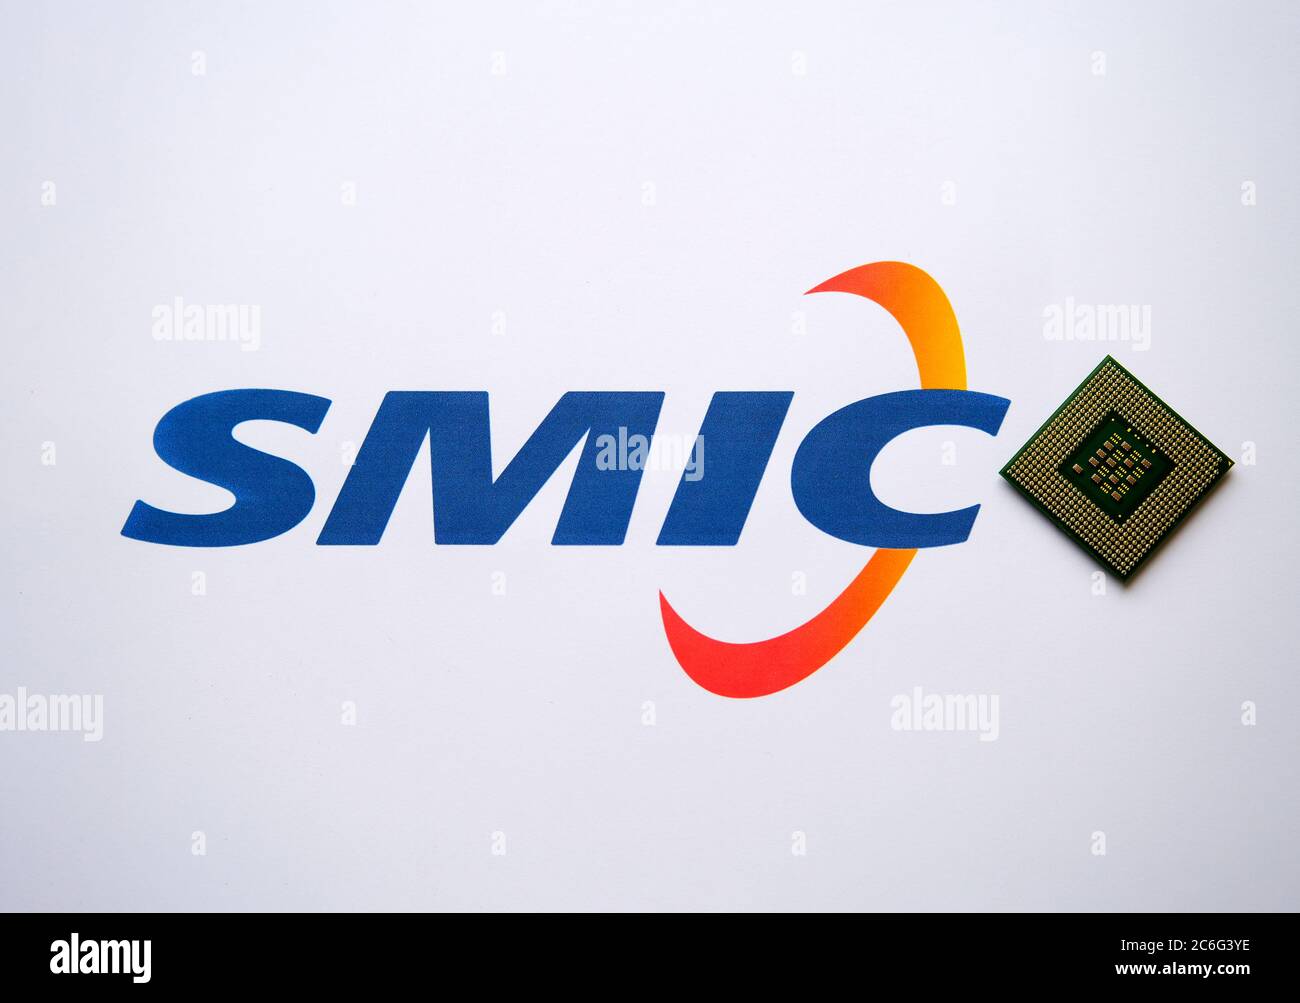 Stone / United Kingdom - July 9 2020: SMIC (Semiconductor Manufacturing International Corporation) logo on the printed document and large computer chi Stock Photo